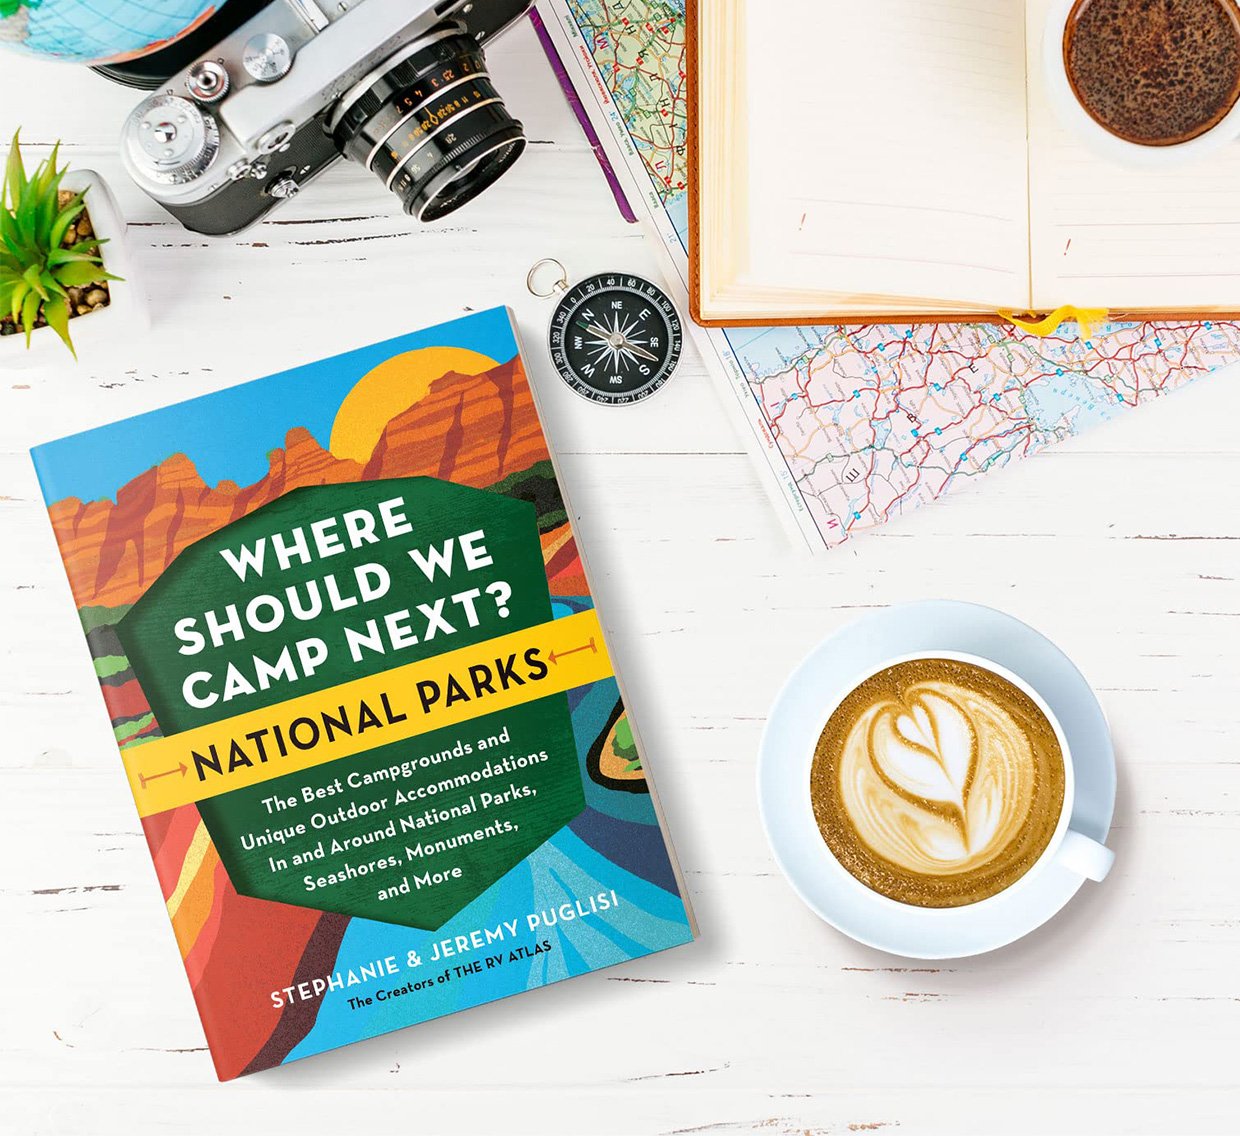 Where Should We Camp Next? National Parks Guide